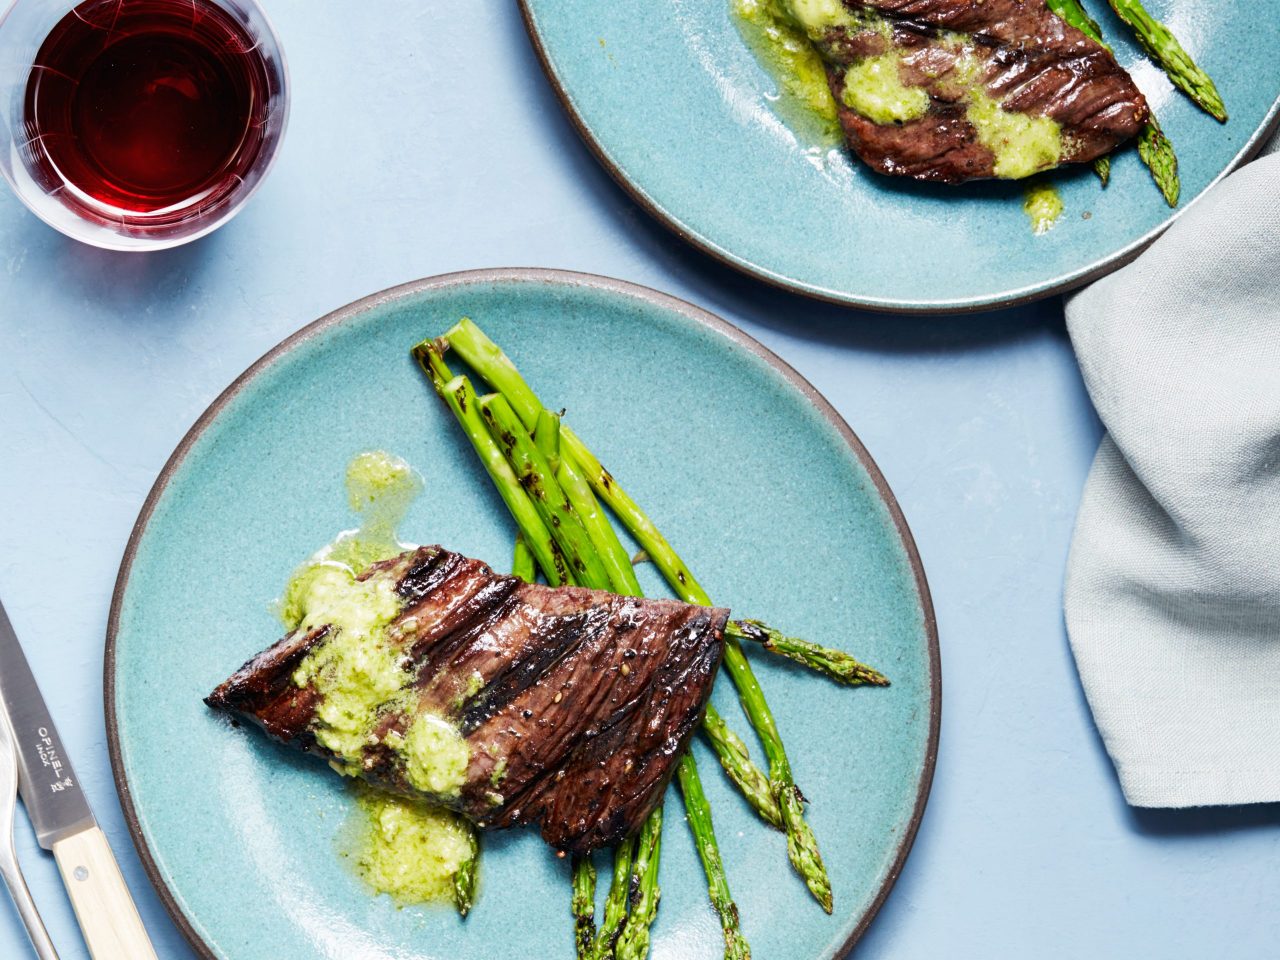 Food Network Kitchen's 15-Minute Grilled Skirt Steak with Pesto Butter